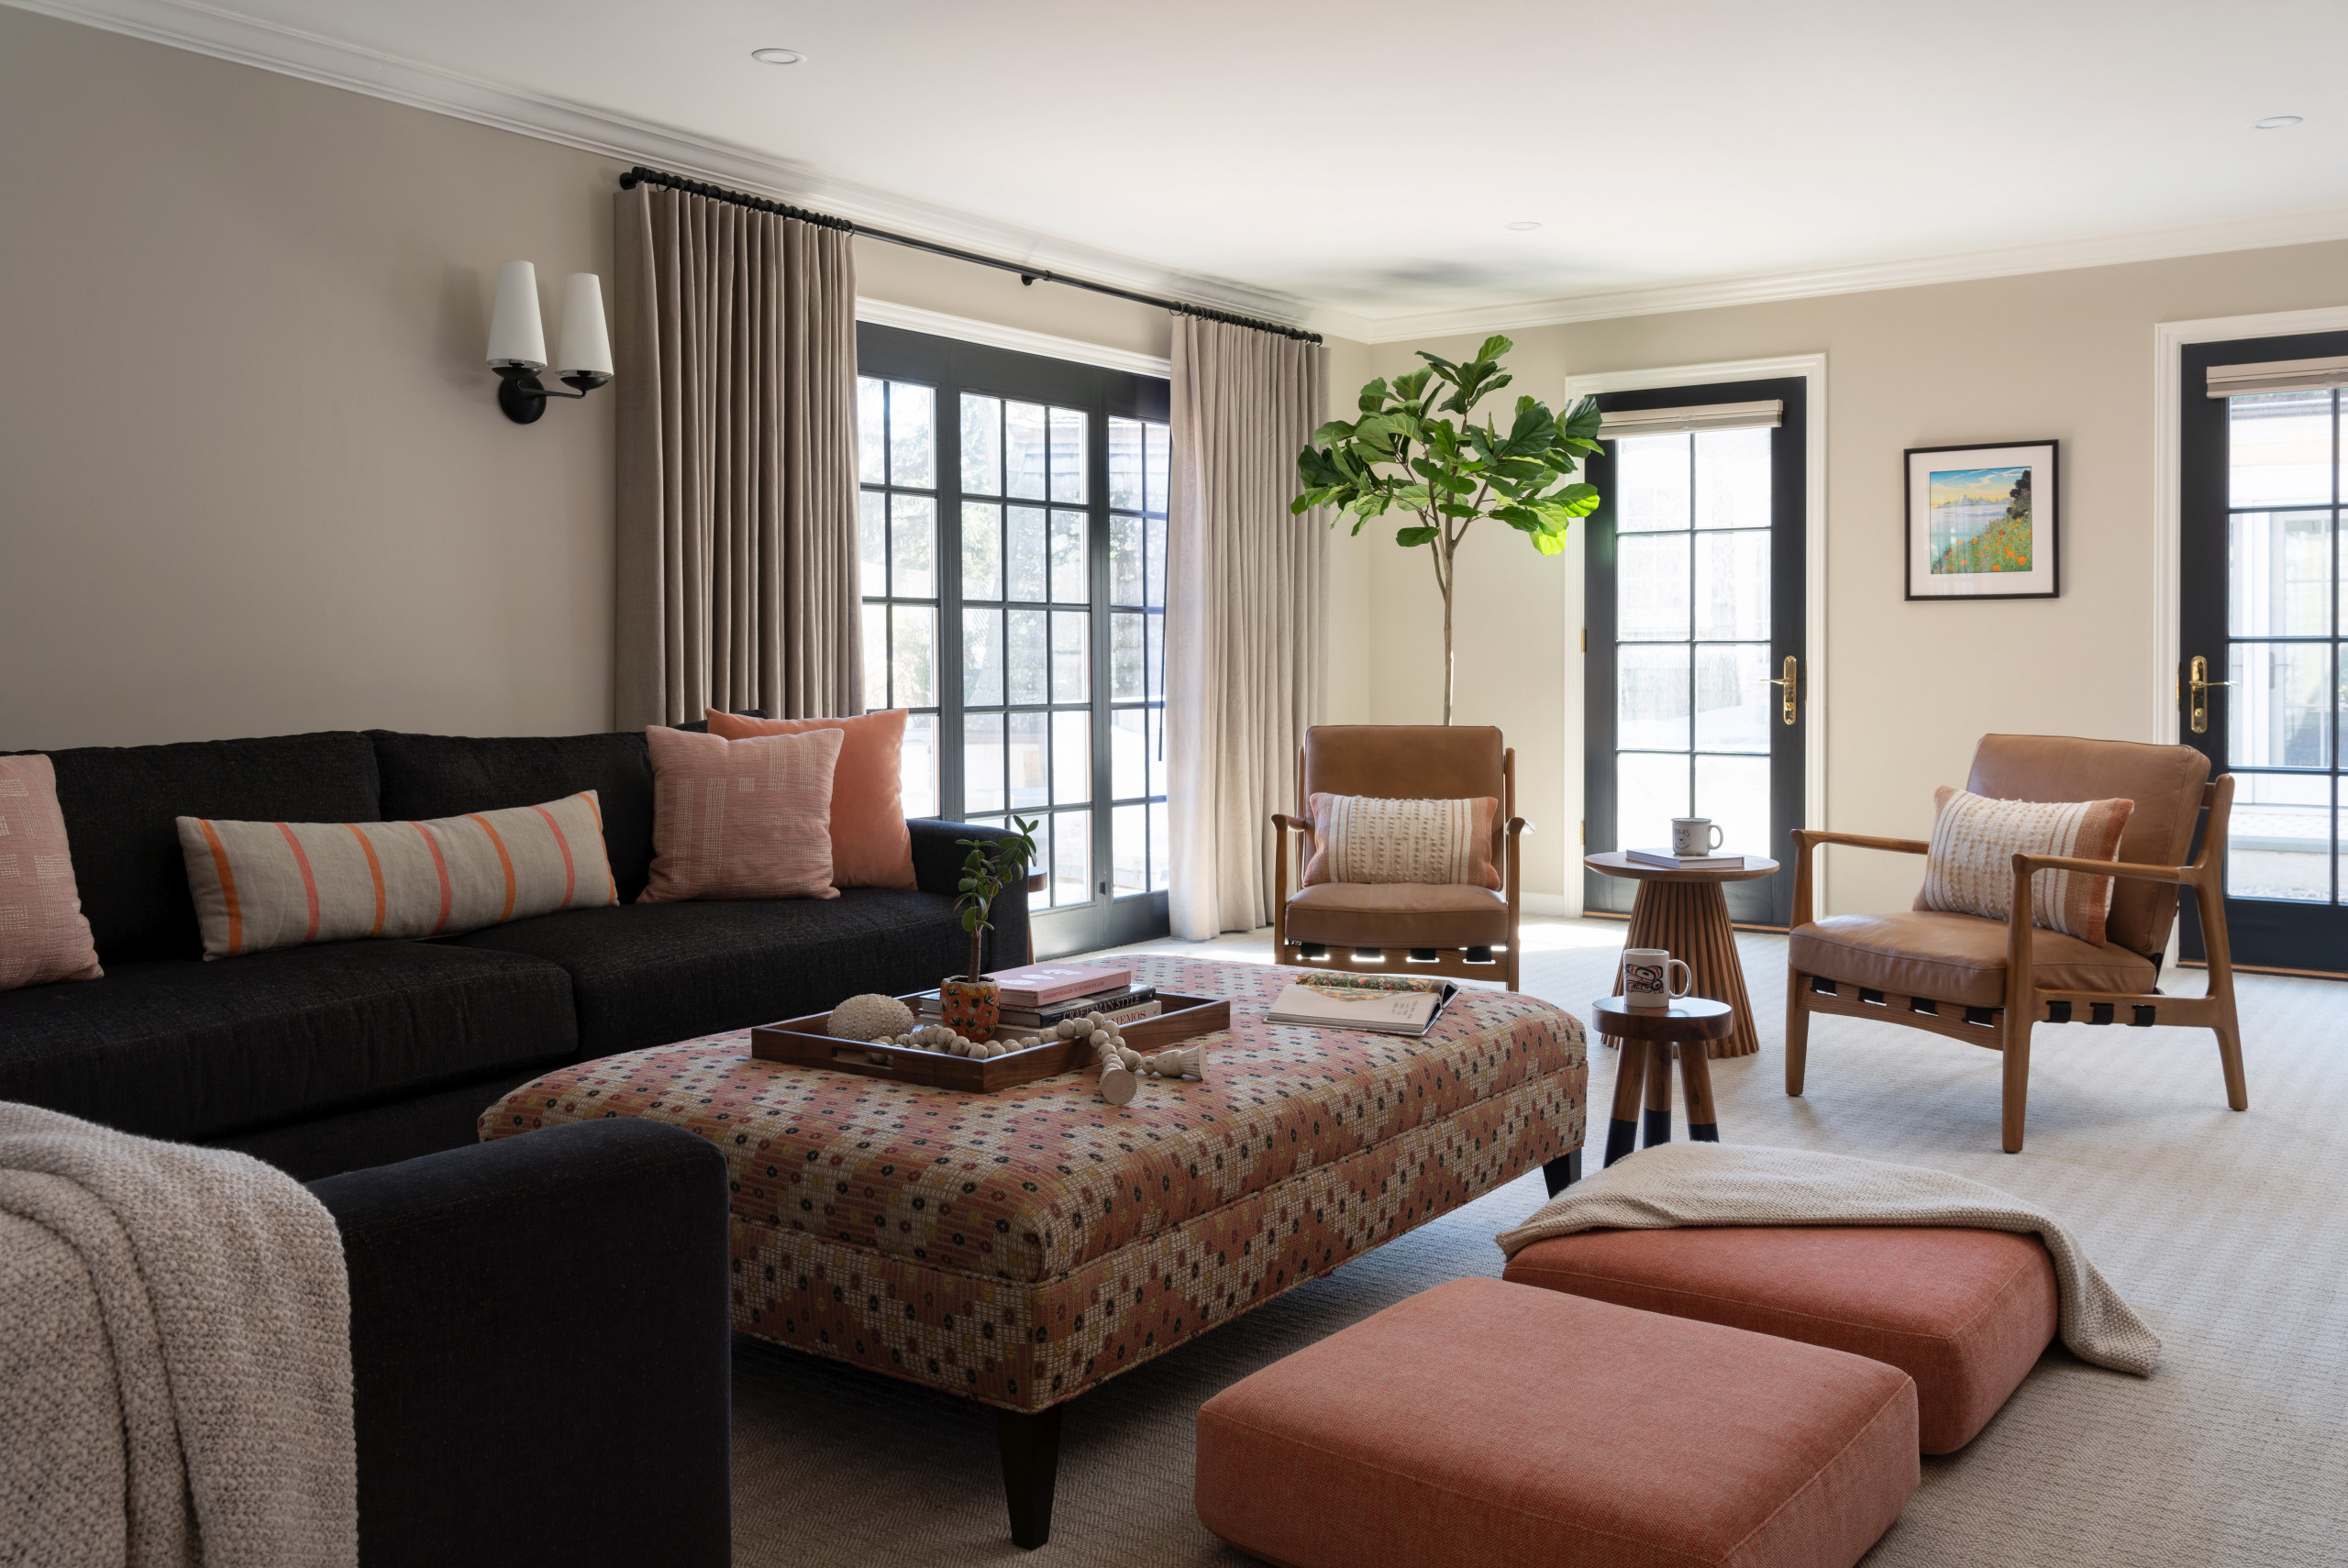 75 Beautiful Gray Living Room Carpet Pictures Ideas Houzz